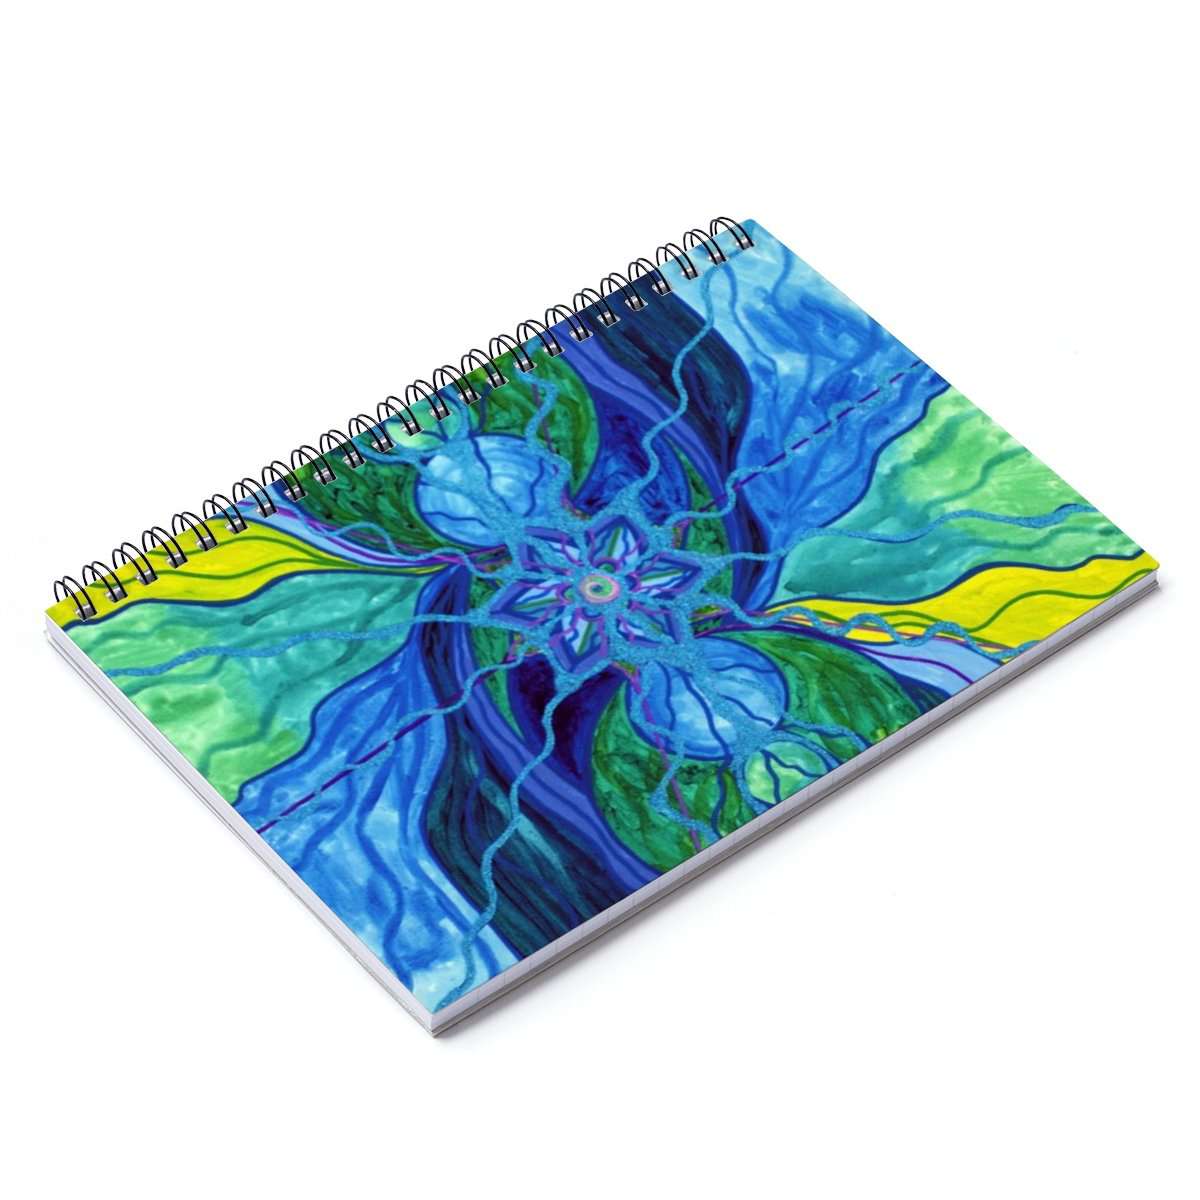 Tranquility - Spiral Notebook